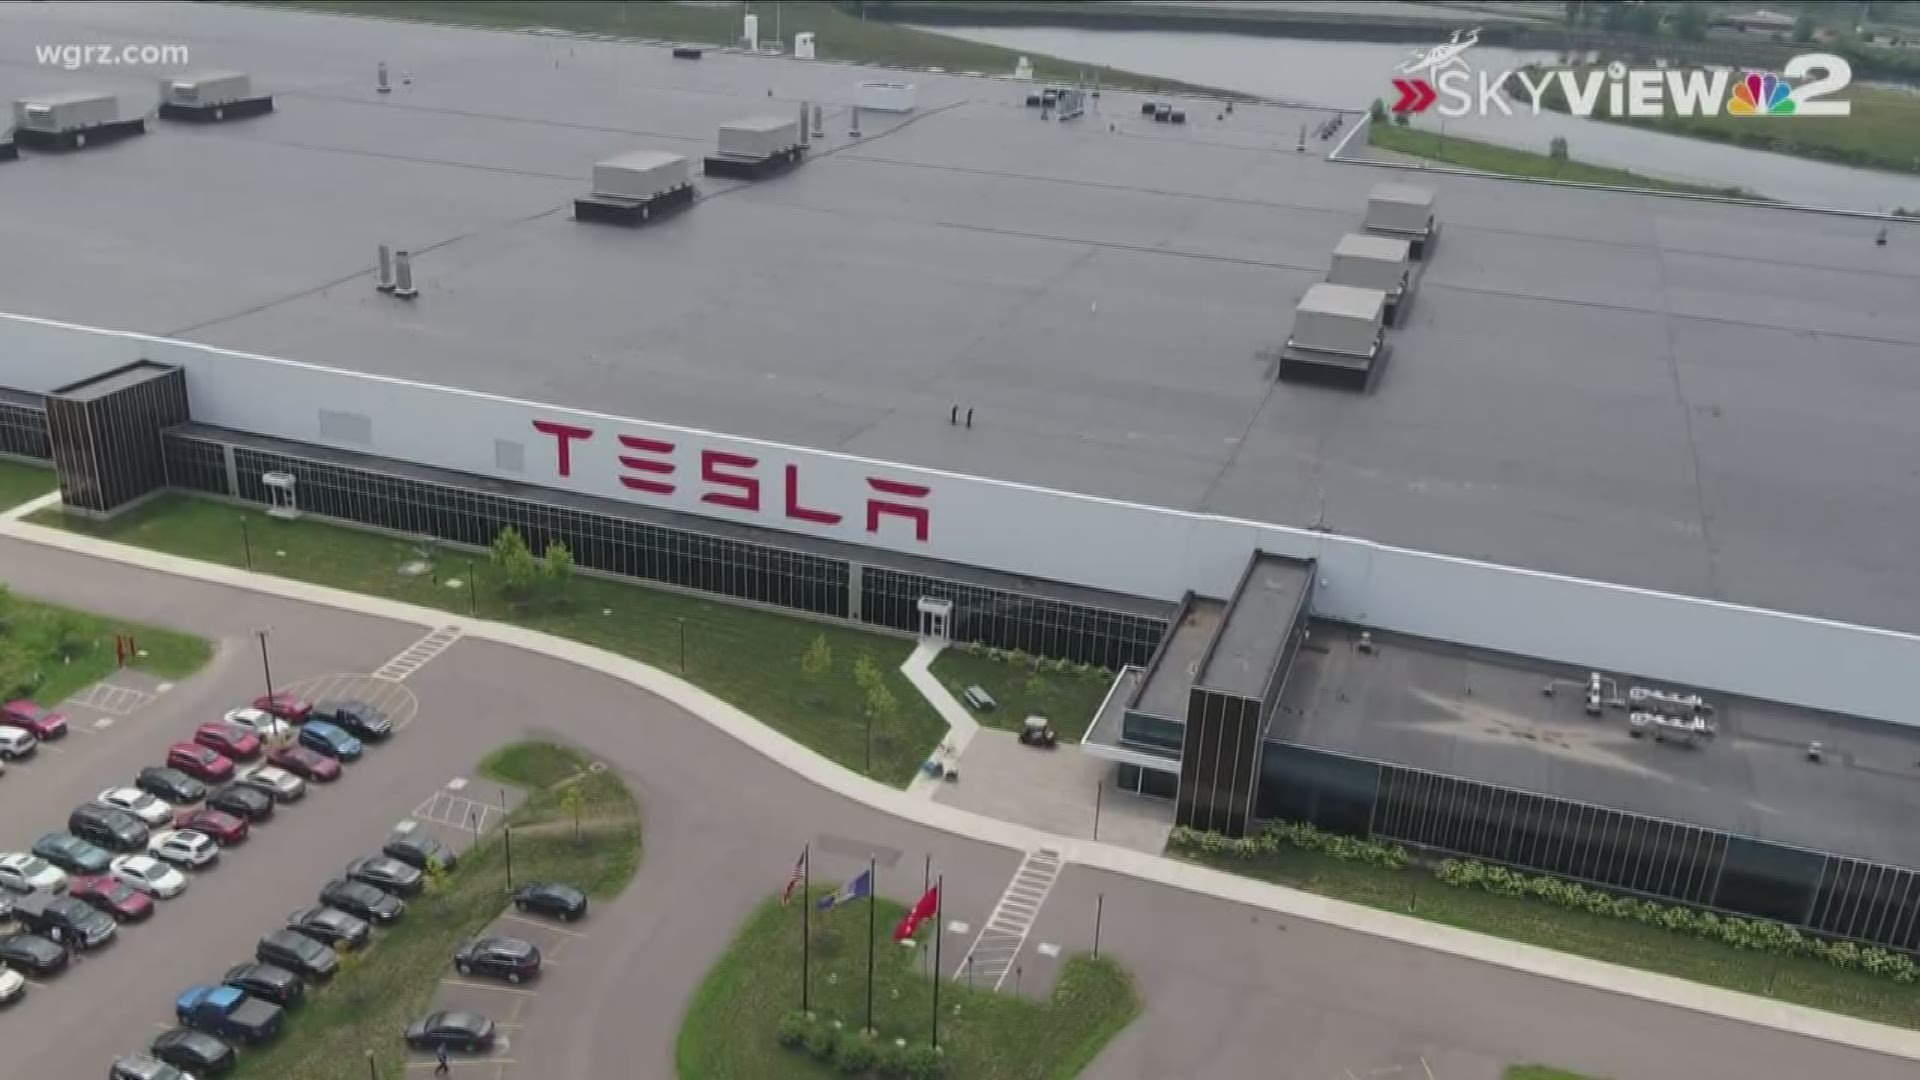 Ever since Tesla CEO Elon Musk tweeted a week and a half ago that the South Buffalo plant would be making ventilators, we've been trying to find out if that is true.